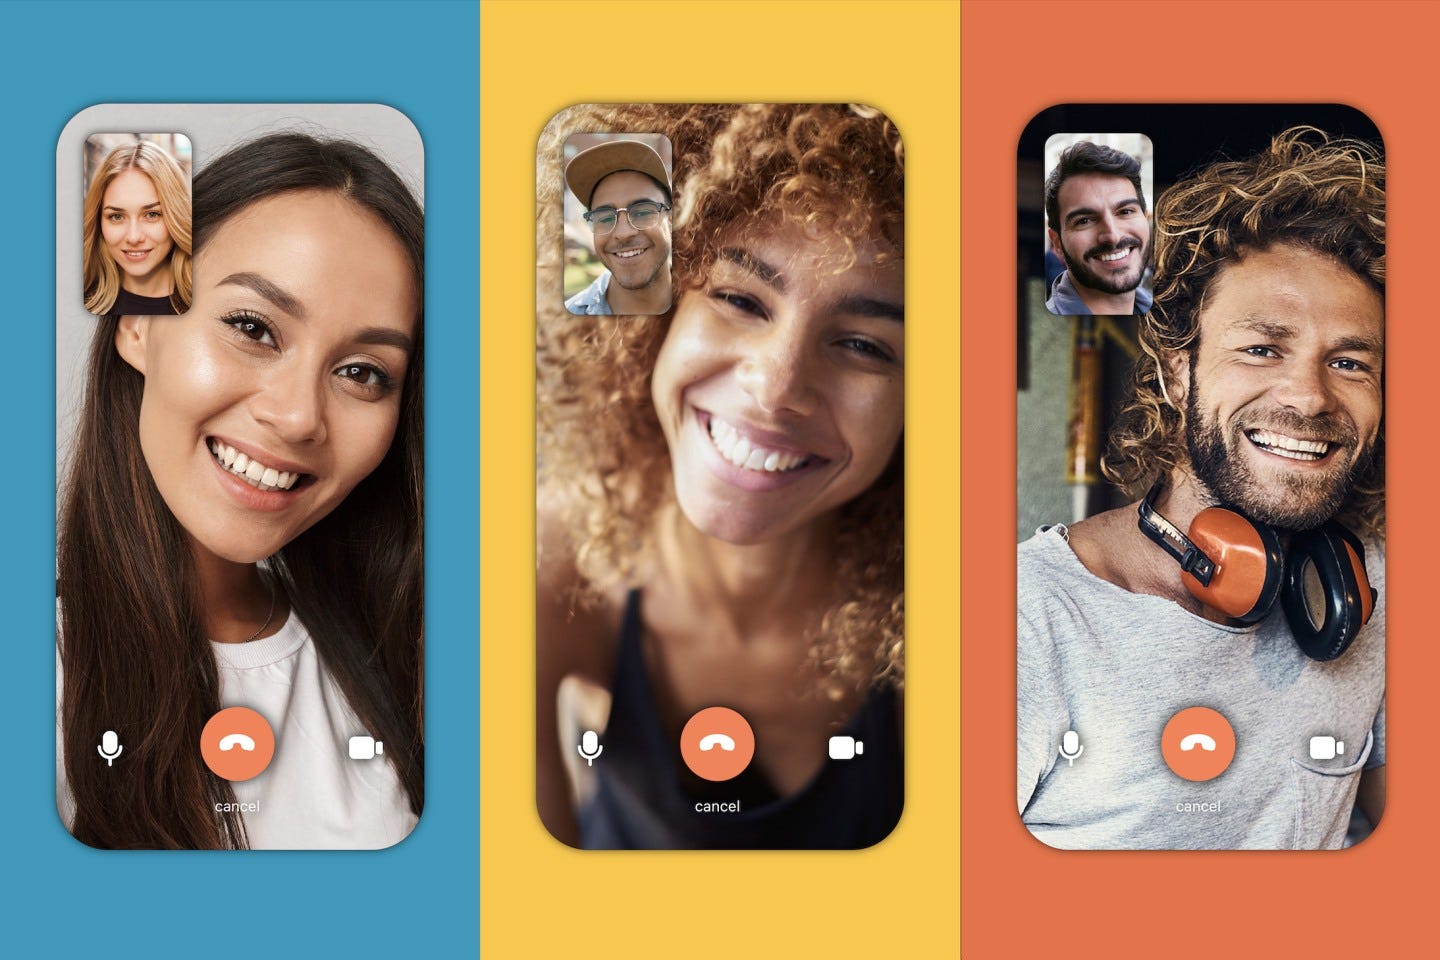 Bumble - Here's How to Use Bumble's Video Chat and Voice Call Features